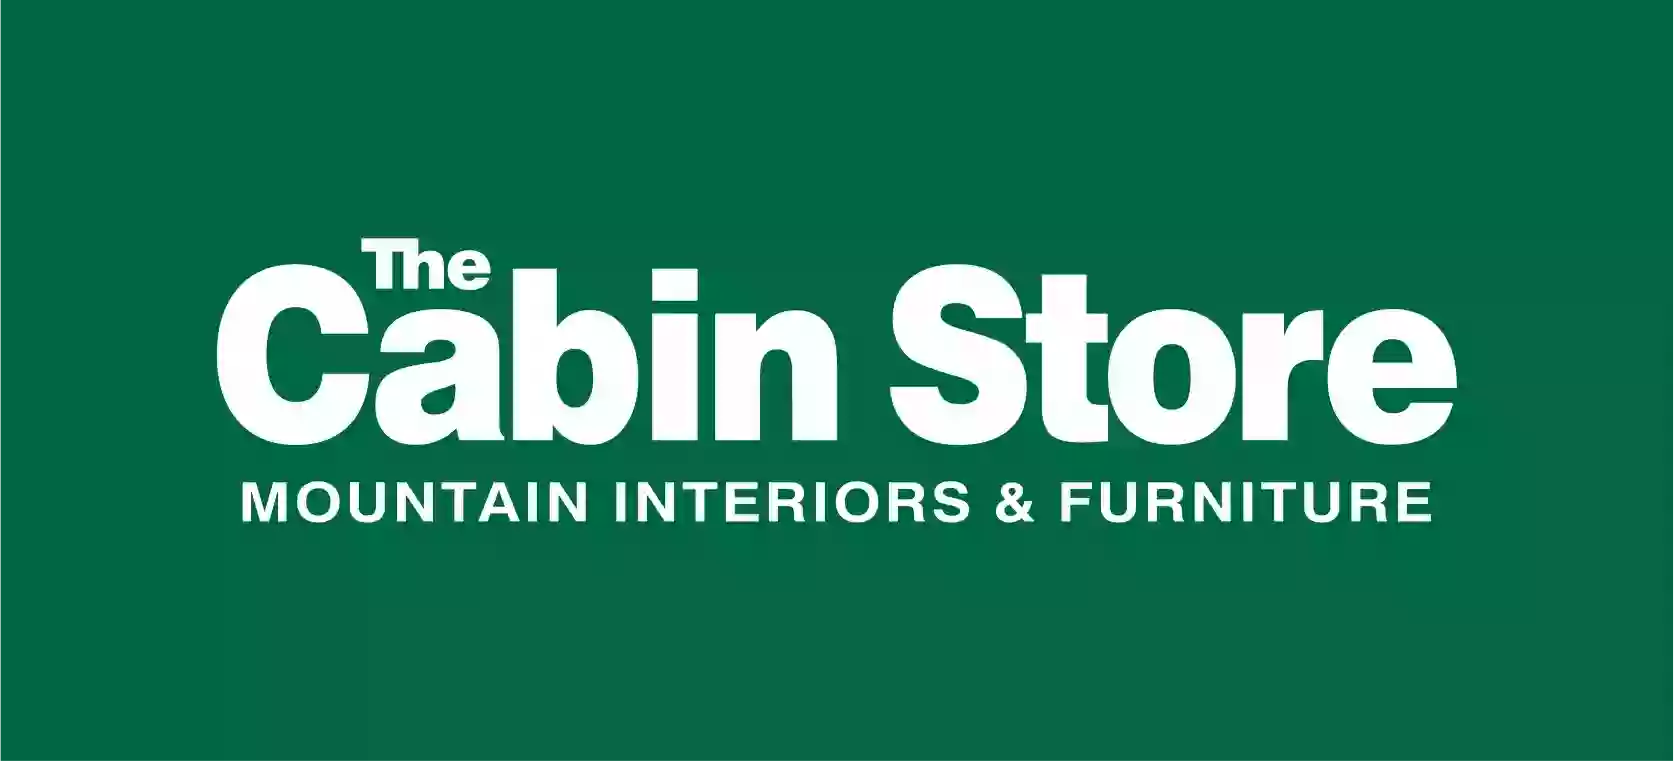 The Cabin Store